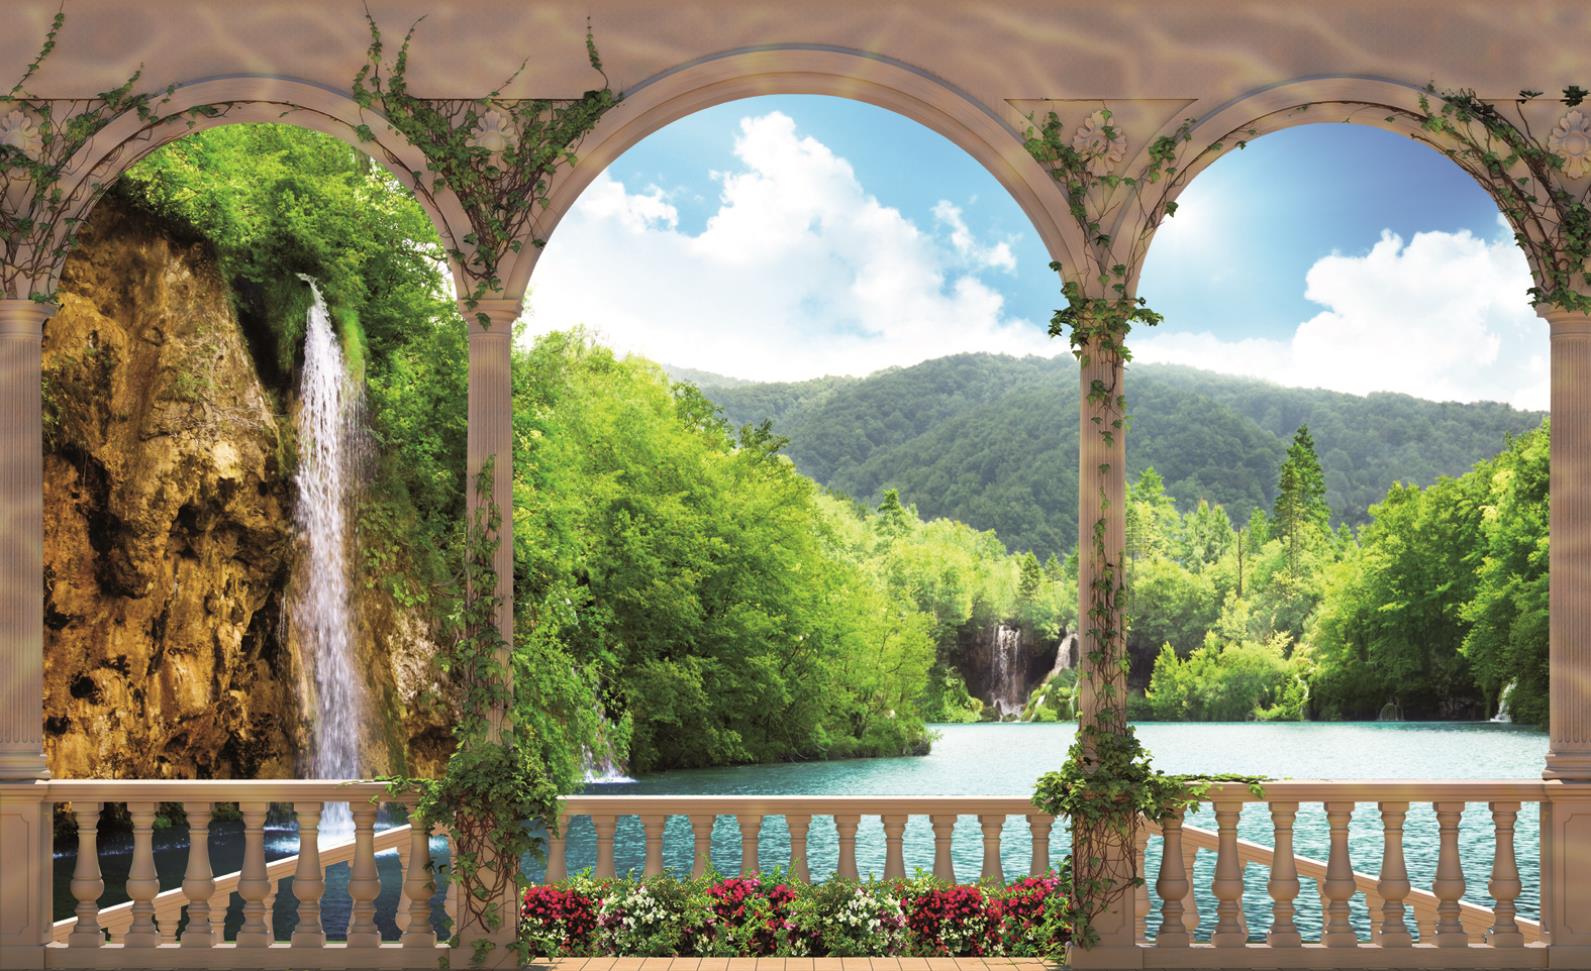  about Arches Landscape Lake PHOTO WALLPAPER WALL MURAL ROOM   1079P